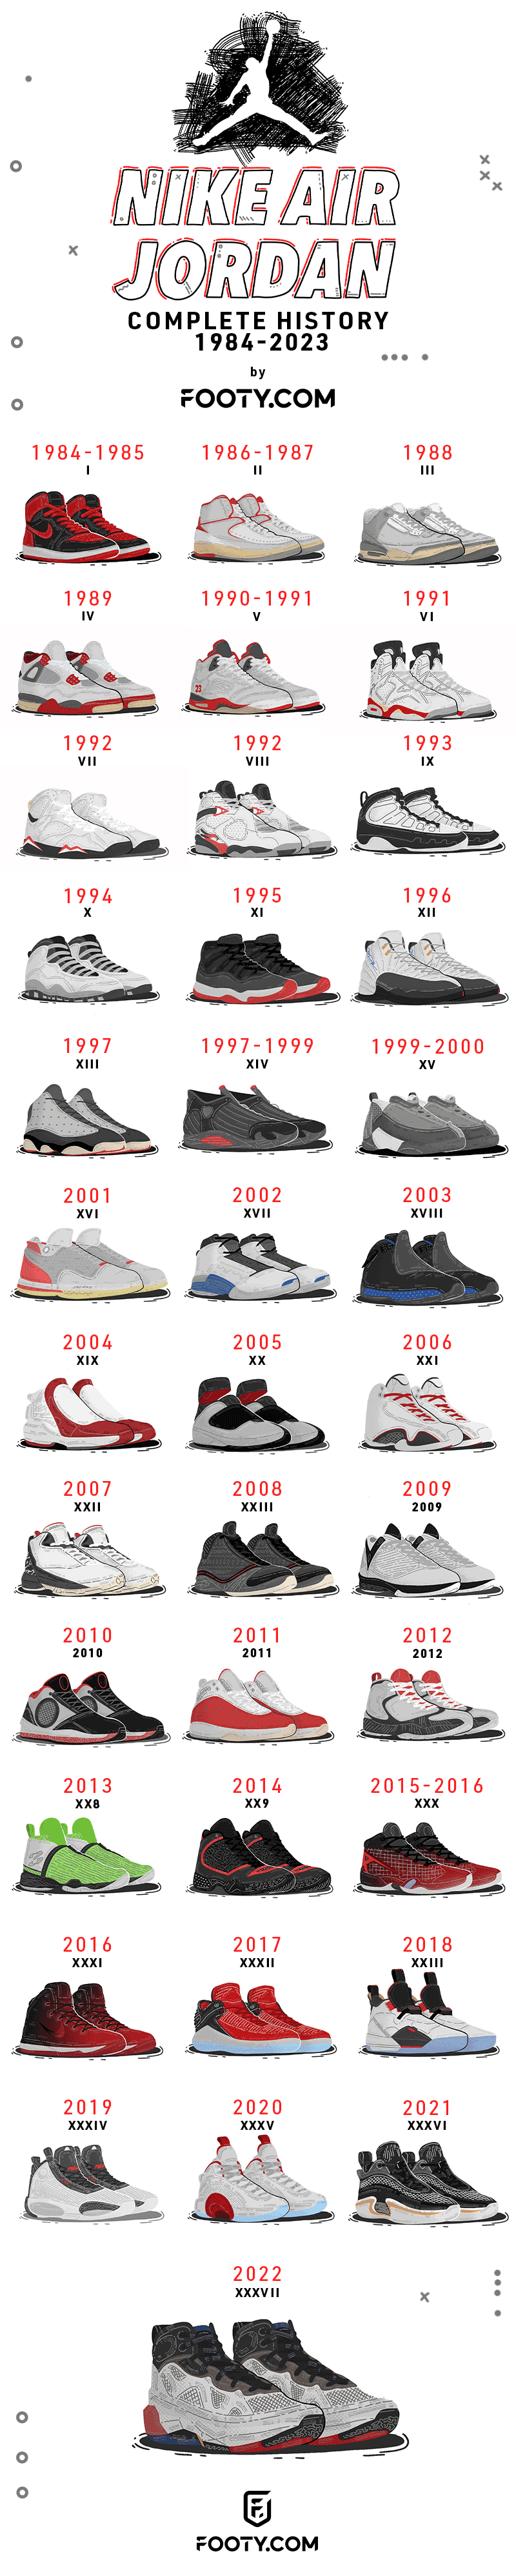 all jordan shoes in order with pictures